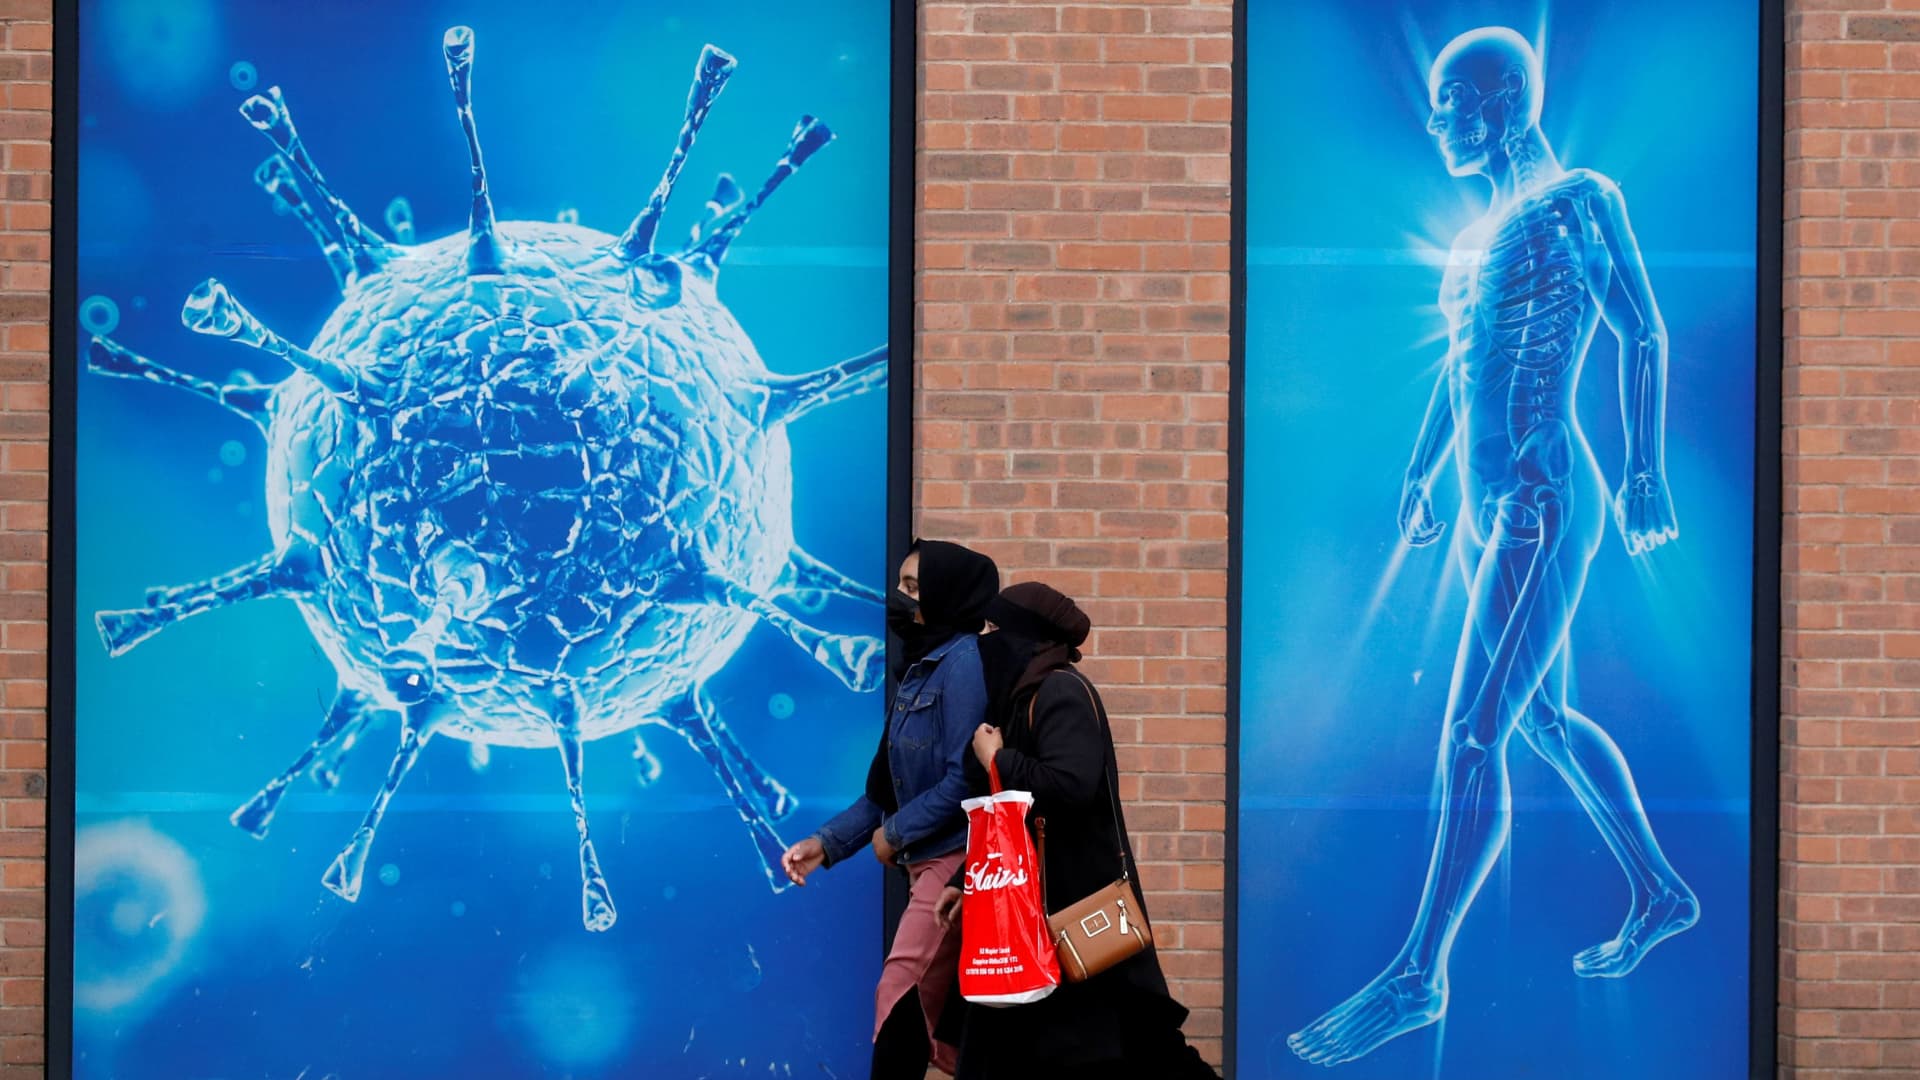 People walk past an illustration of a virus outside a regional science centre, as the city and surrounding areas face local restrictions in an effort to avoid a local lockdown being forced upon the region, amid the coronavirus disease (COVID-19) outbreak, in Oldham, Britain August 3, 2020.